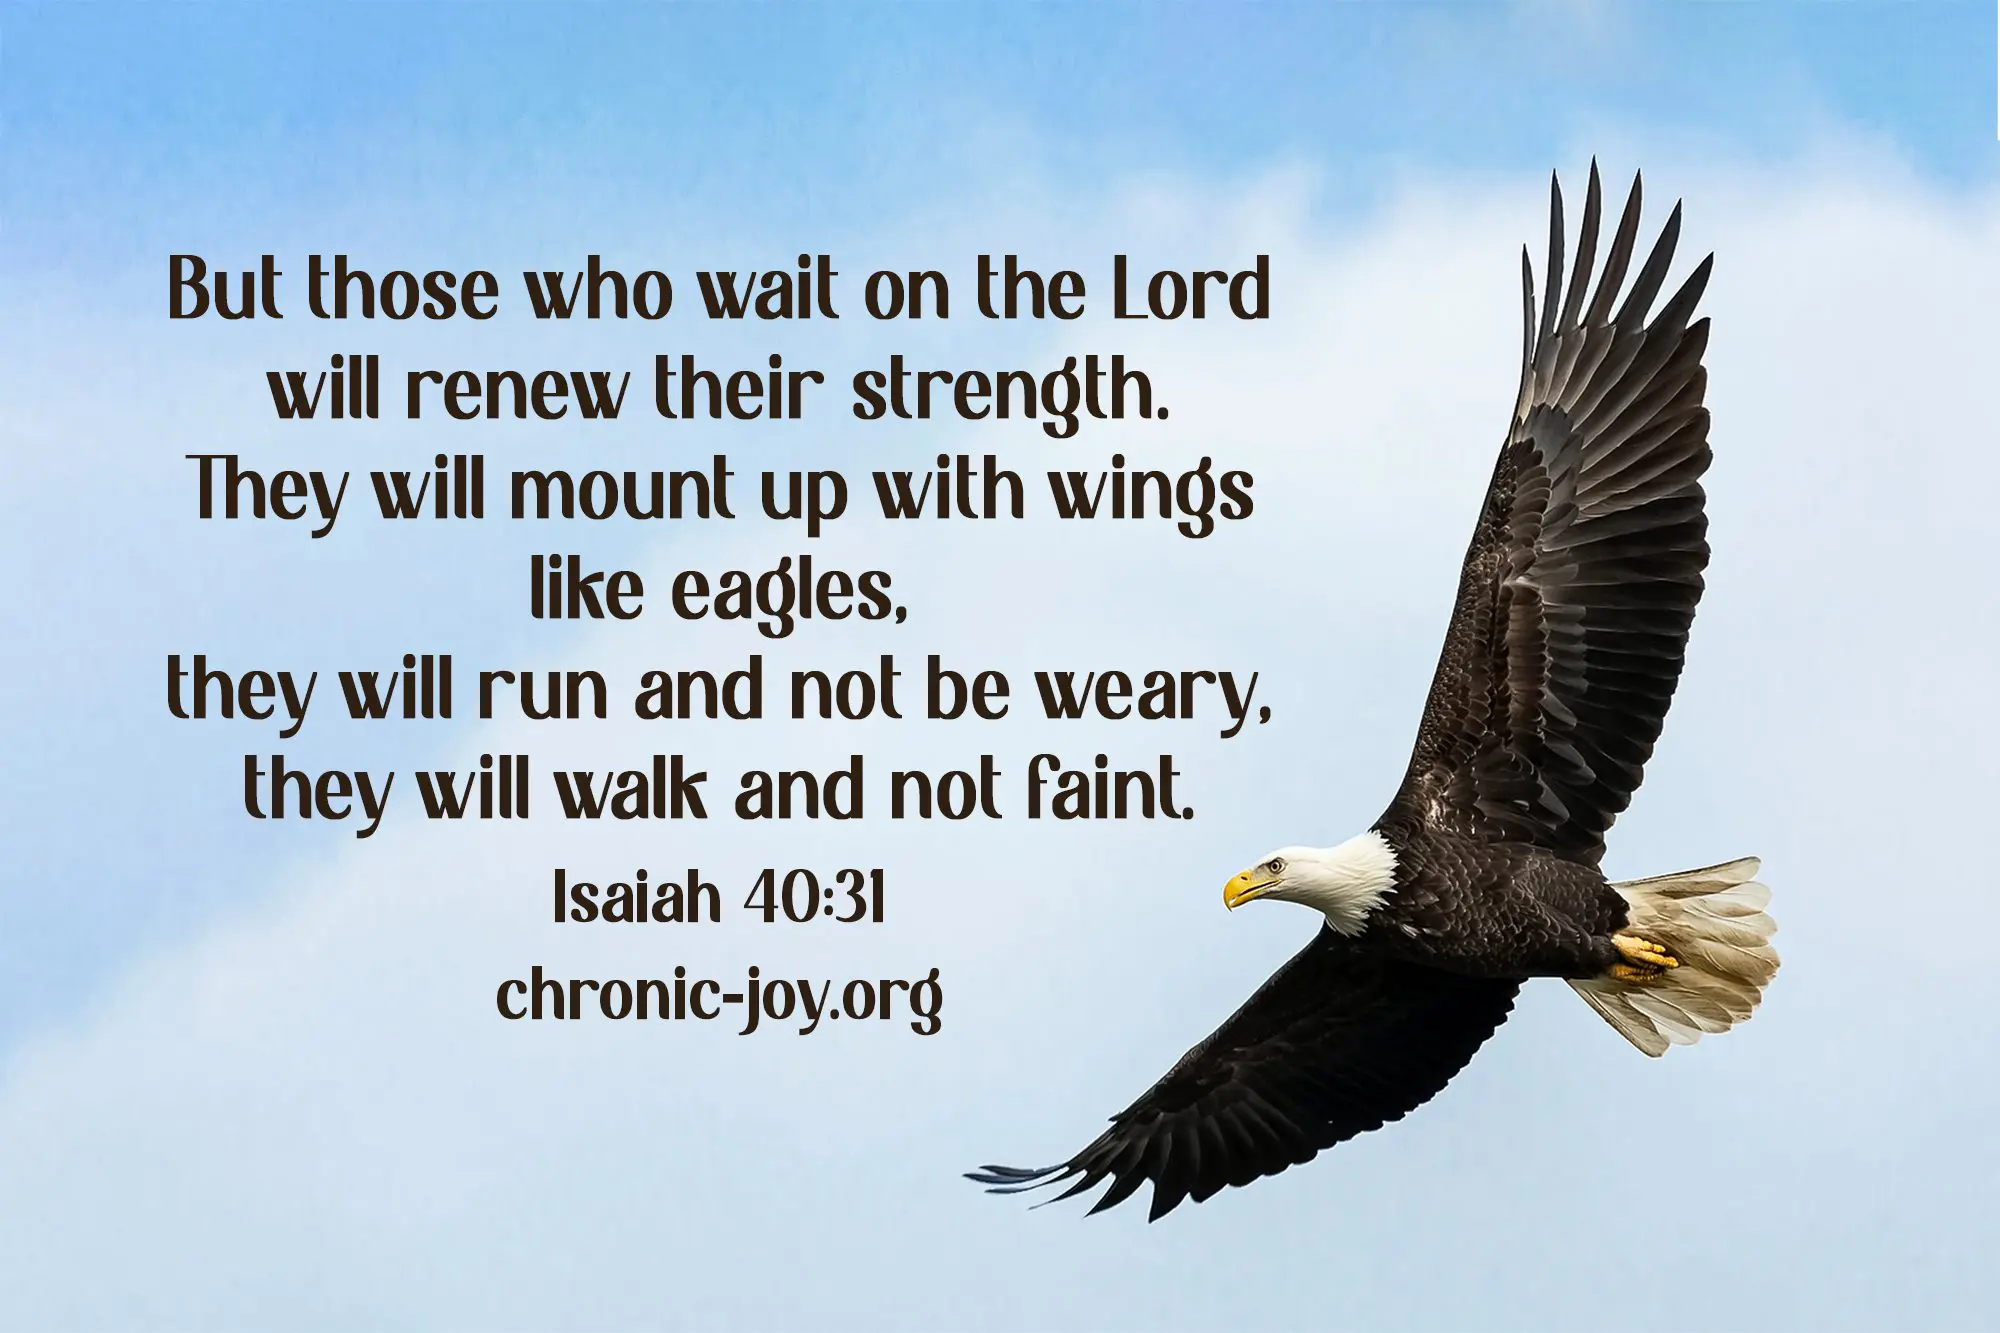 "But those who wait on the Lord will renew their strength. They will mount up with wings like eagles, they will run and not be weary, they will walk and not faint." Isaiah 40:31